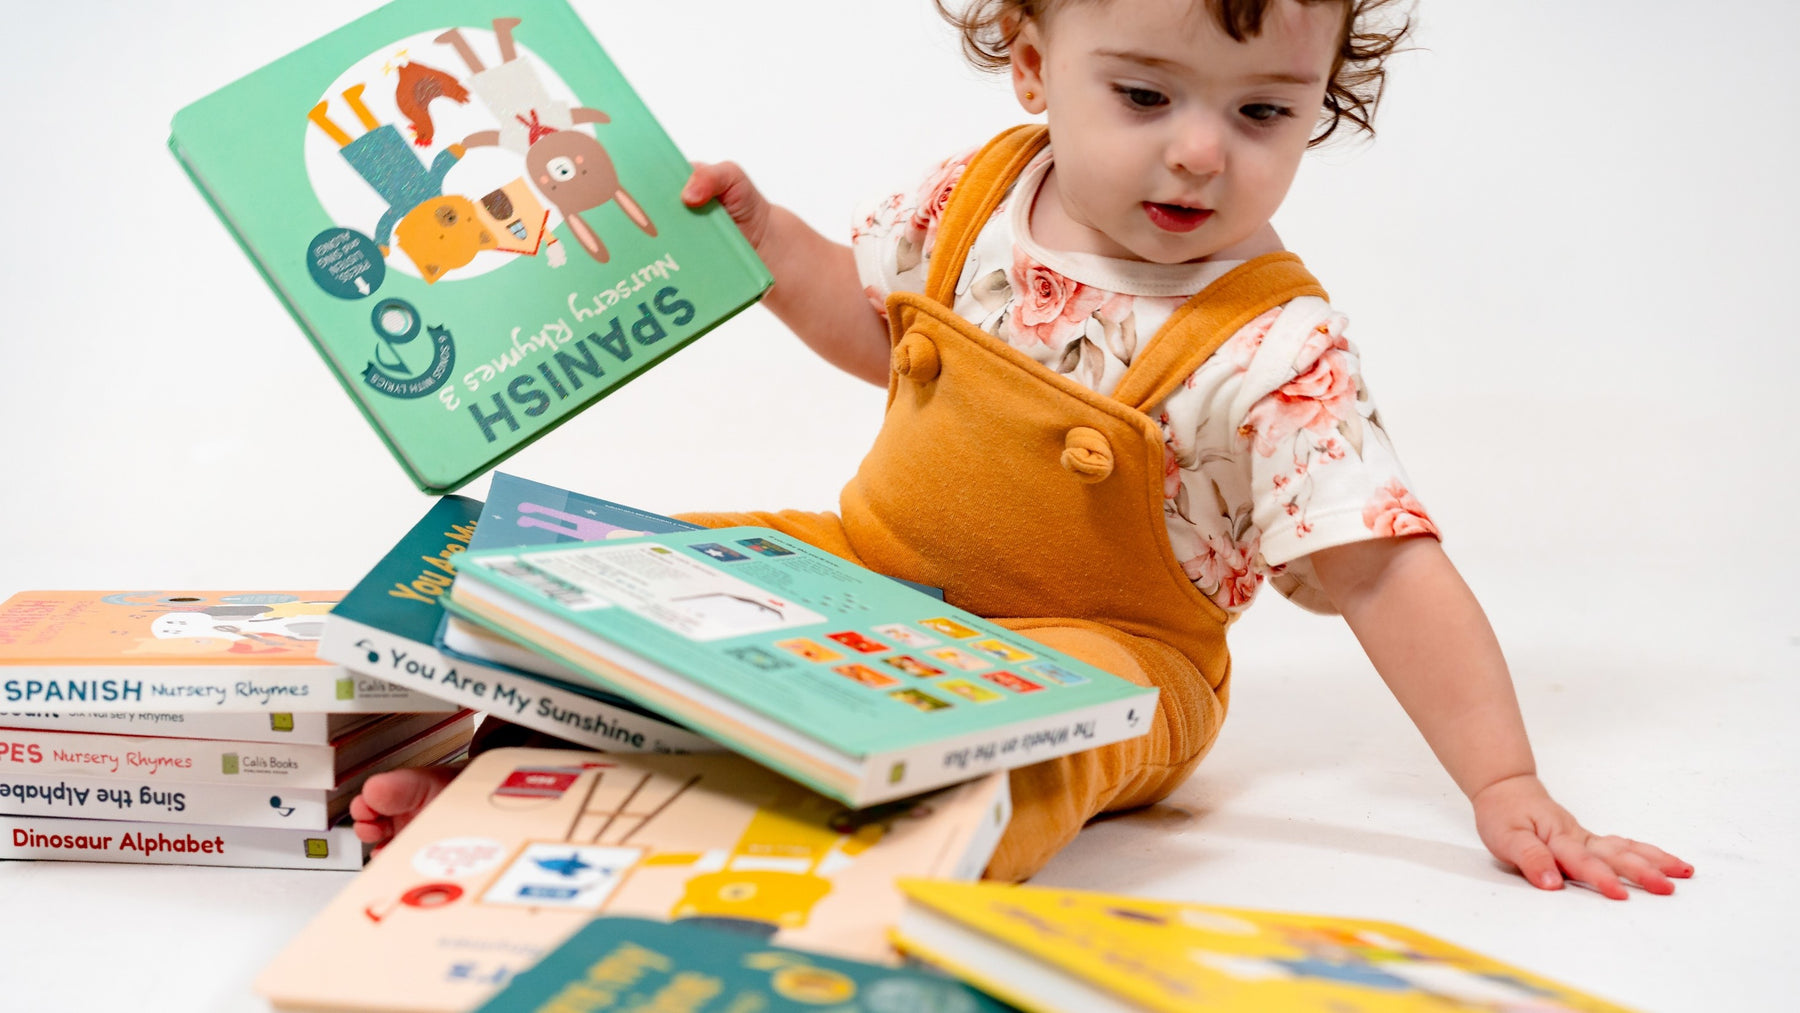 A toddler is picking a book from a pile of book. Nursery rhymes, children's books, fun activities, educational.